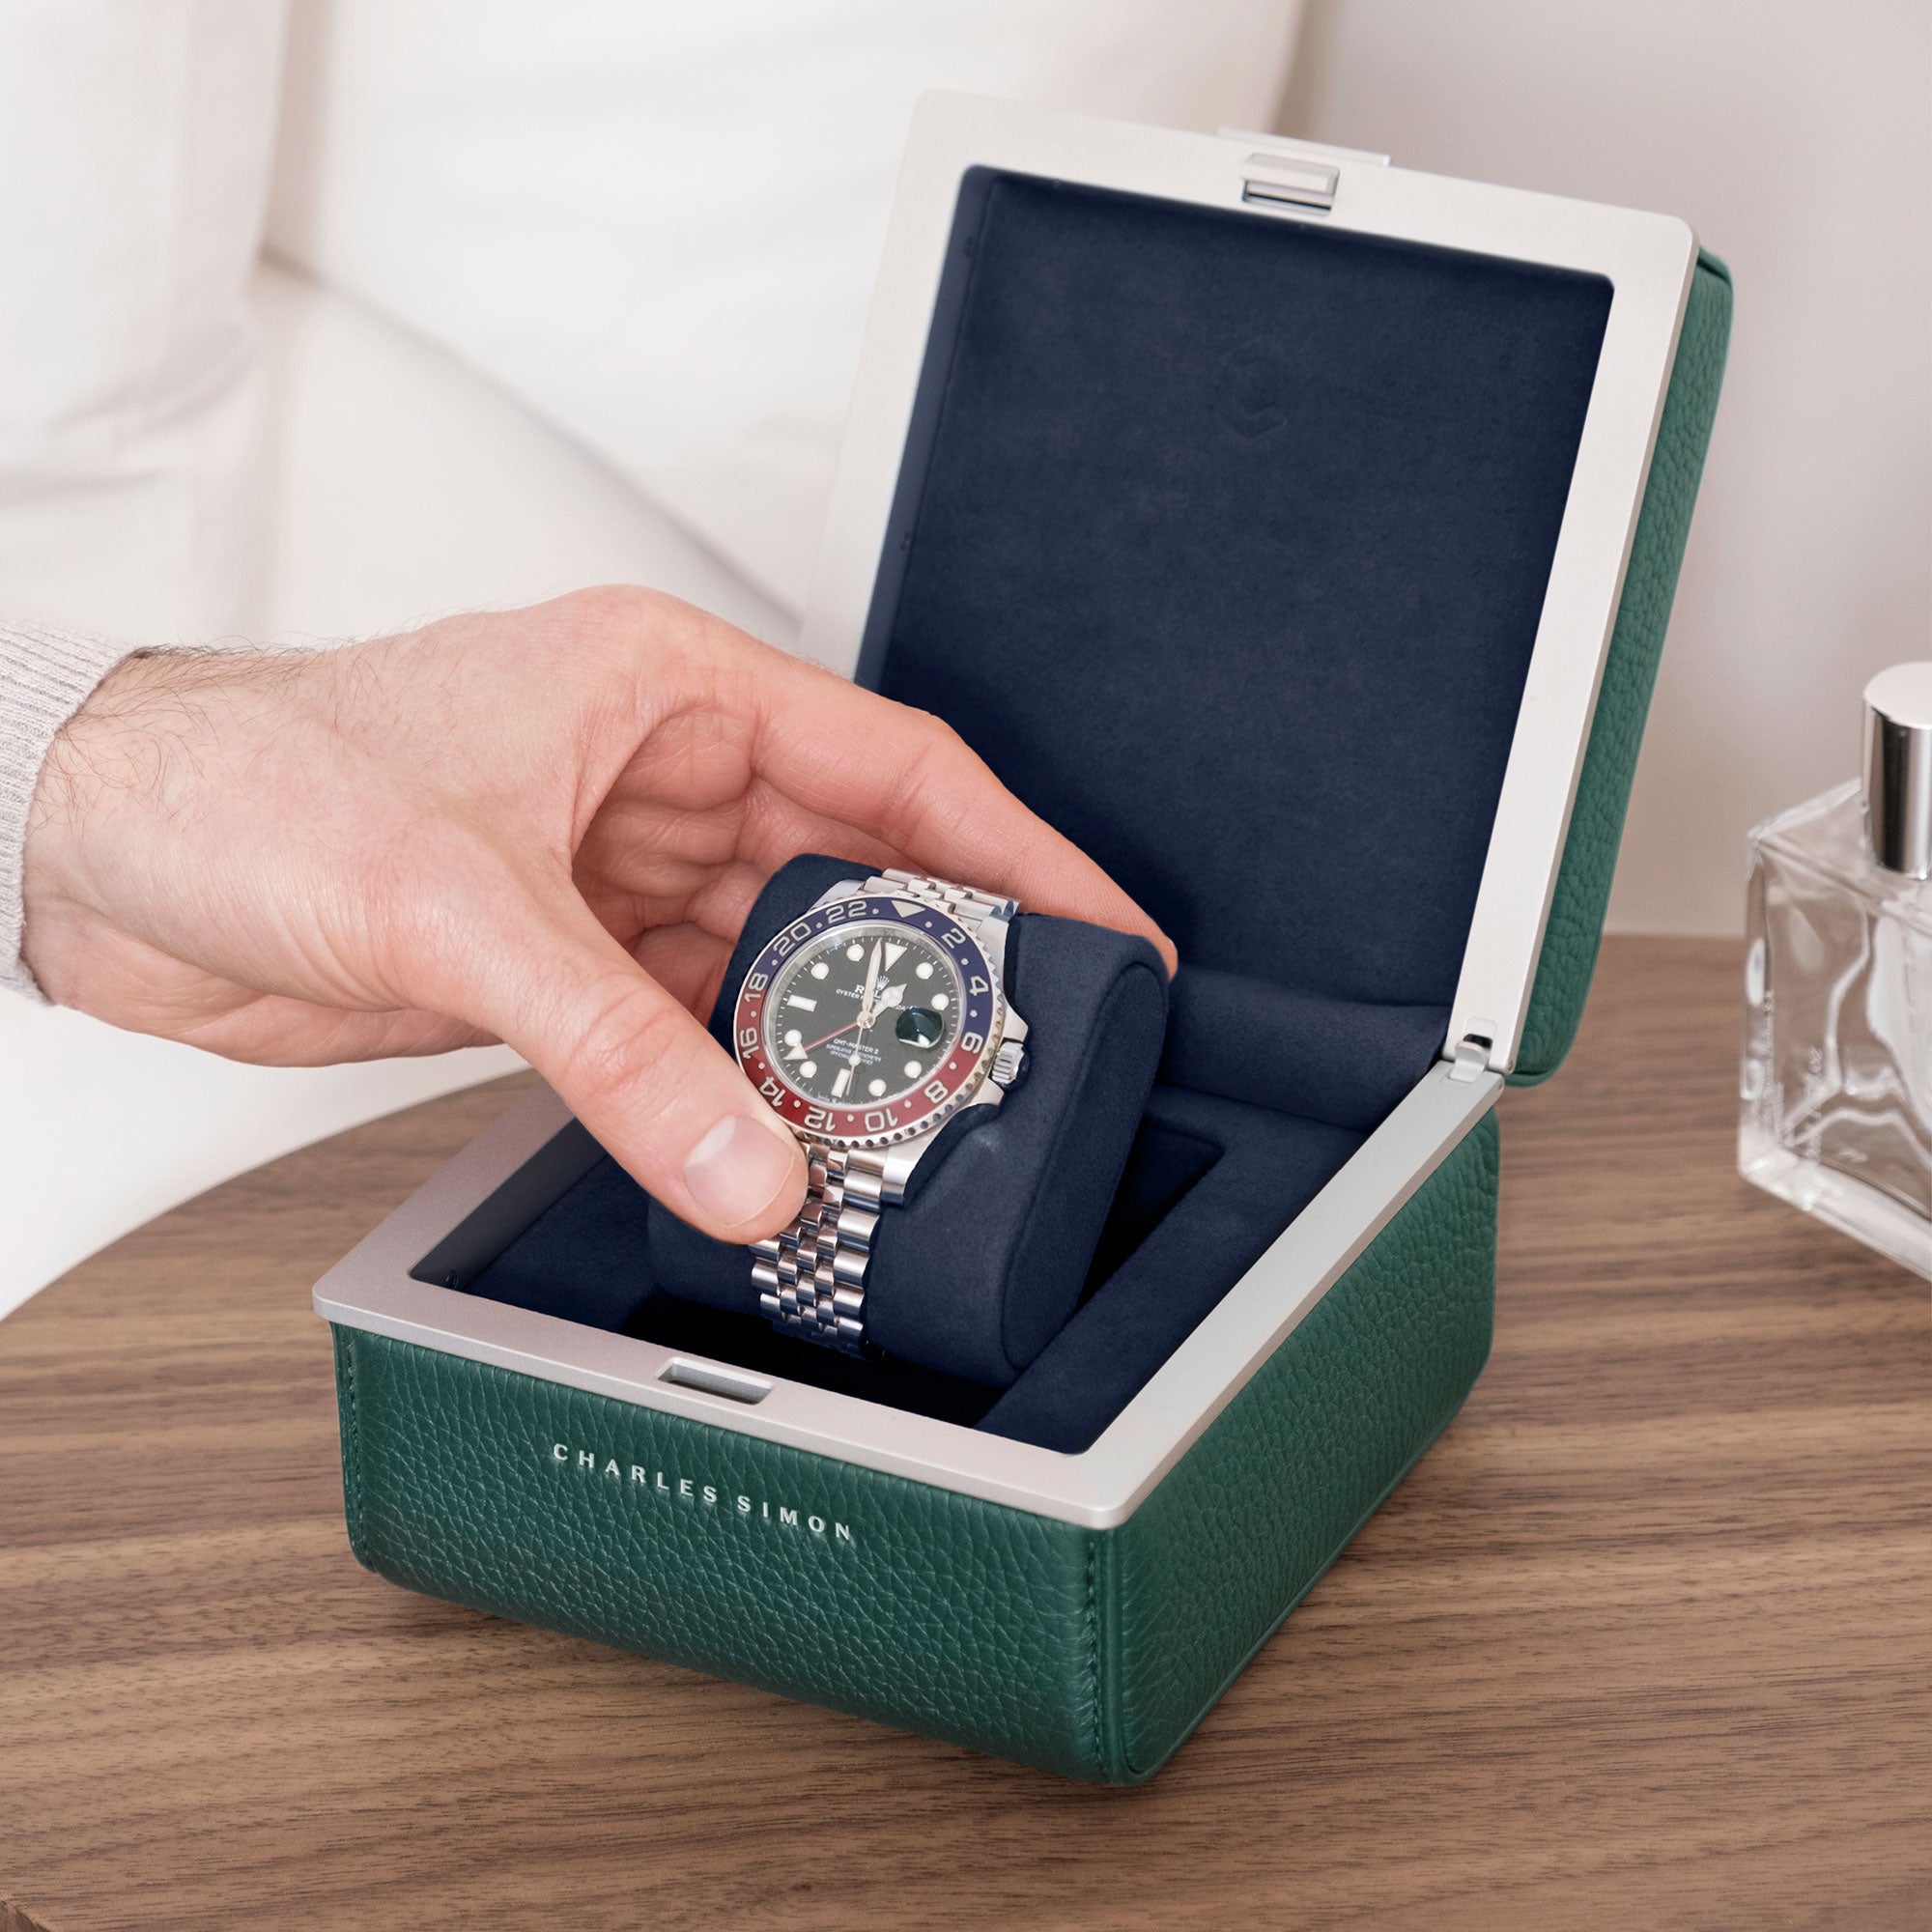 Lifestyle photo of emerald Eaton 1 watch case on modern nightstand. Man is opening luxury watch case with Rolex Pepsi watch placed on deep blue removable watch cushion.